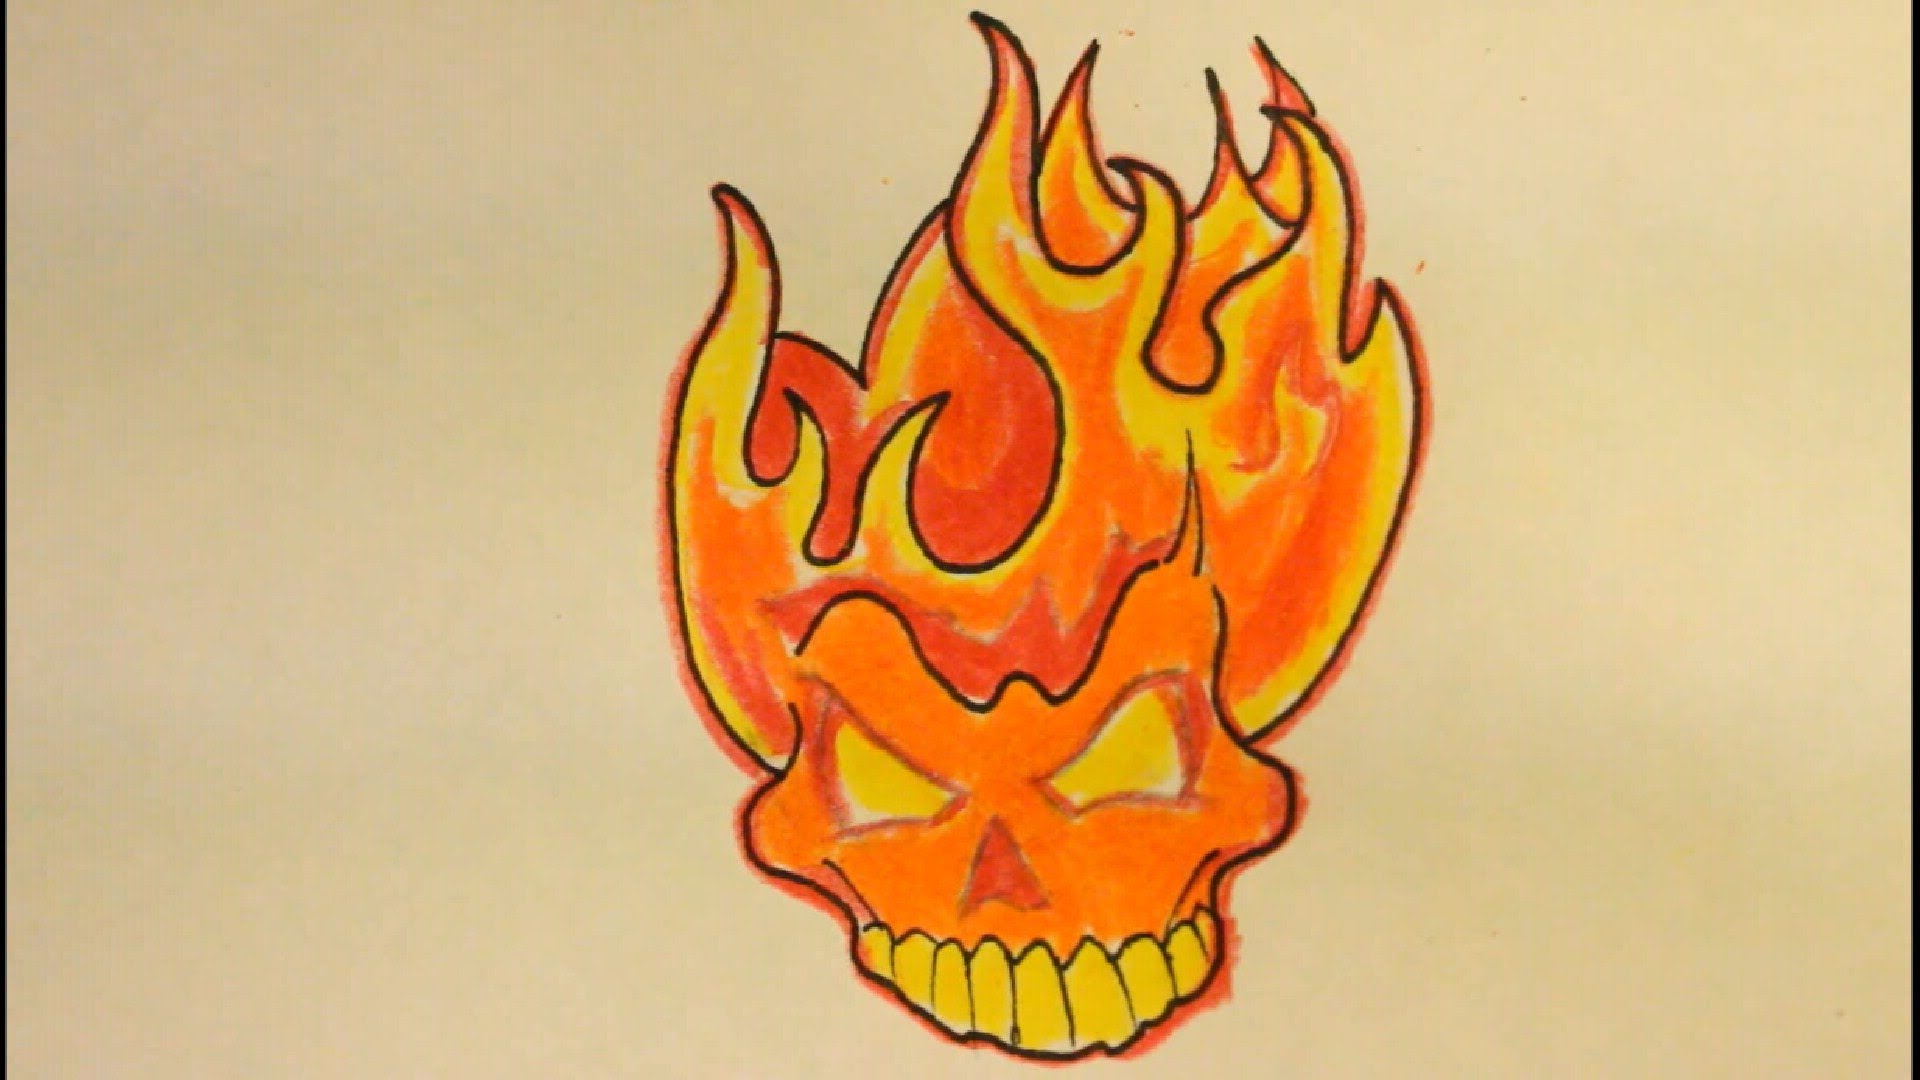 How To Draw A Skull On Fire| With Flames|Easy| For Beginners - YouTube